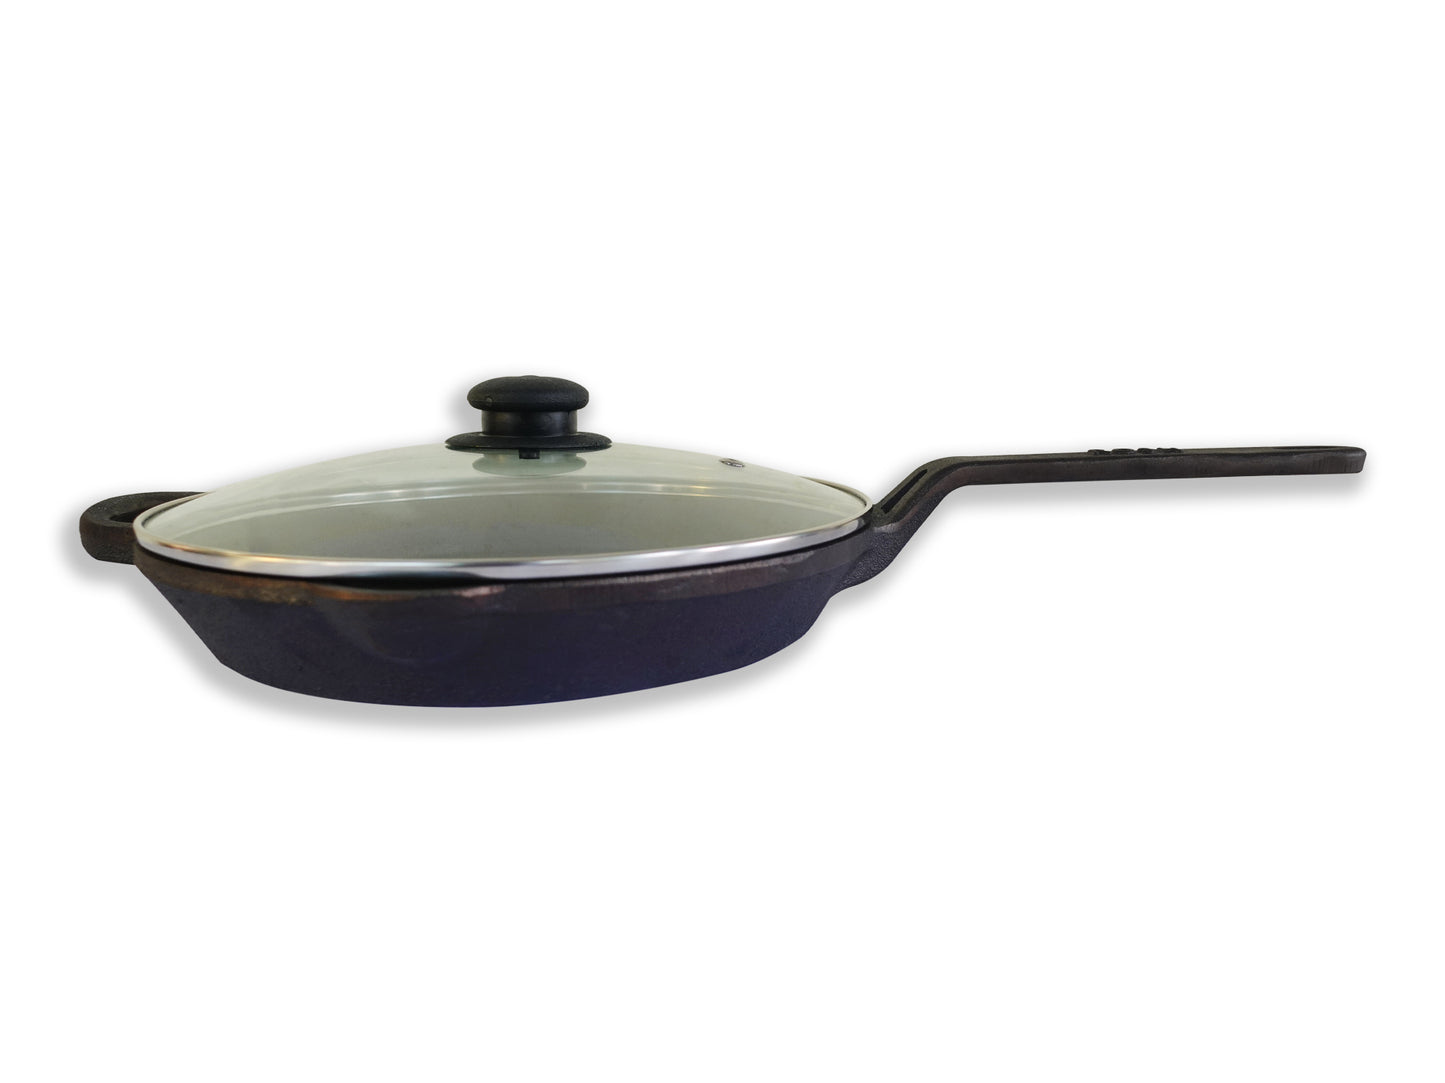 Combo Offer -9 - Skillet - With Lid - Elevated Handle - Rosh - Modern Style. &  Dutch Pot - Rosh - With Lid